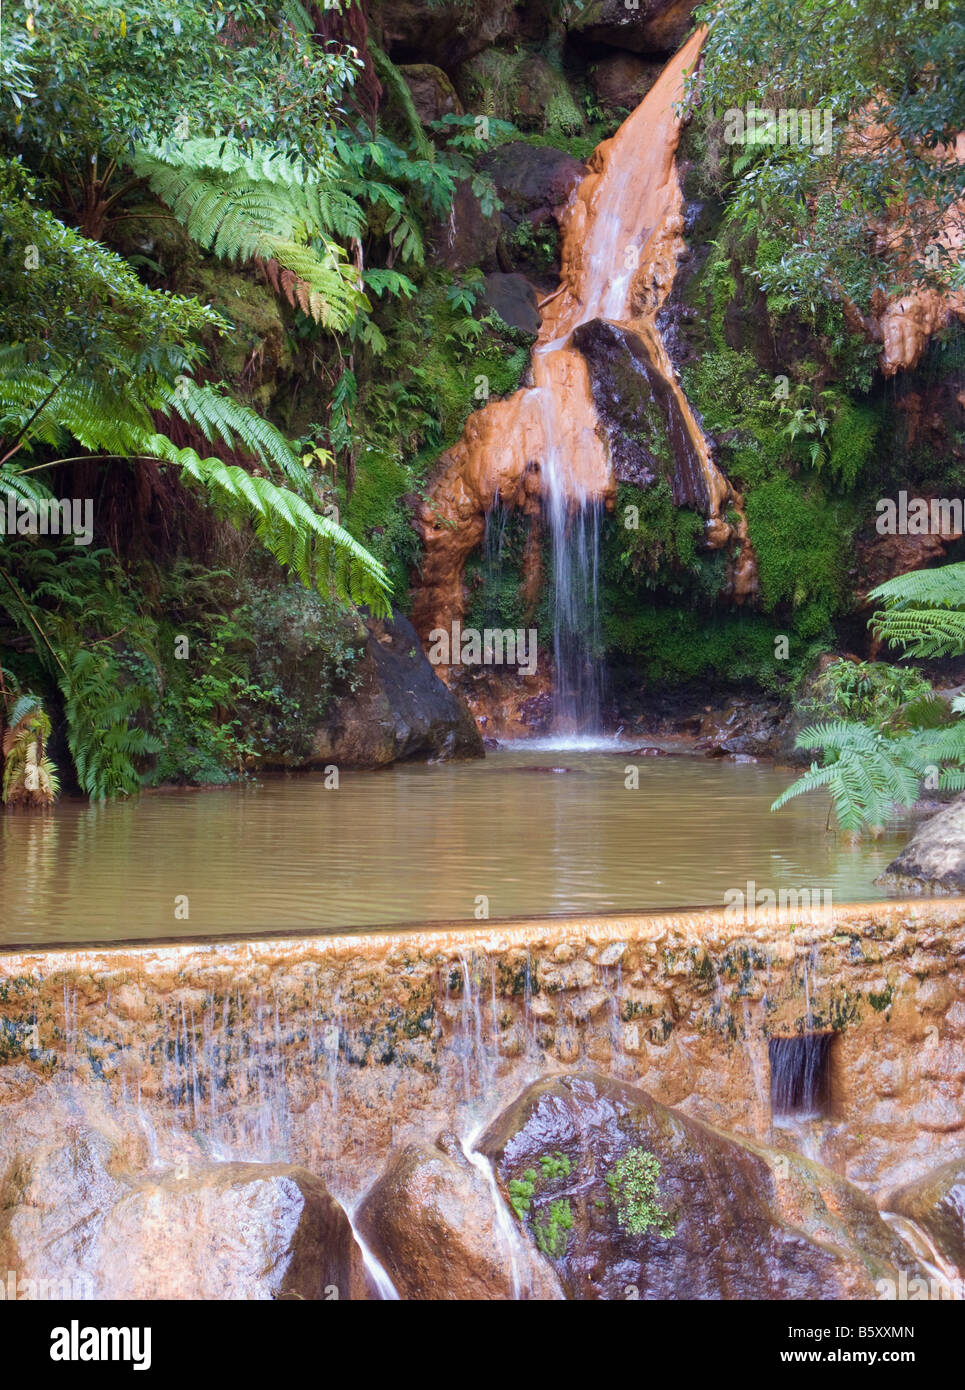 The warm waterfall at Caldeira Velha, Sao Miguel, Azores, Portugal. The naturally heated water is 32 C. Stock Photo